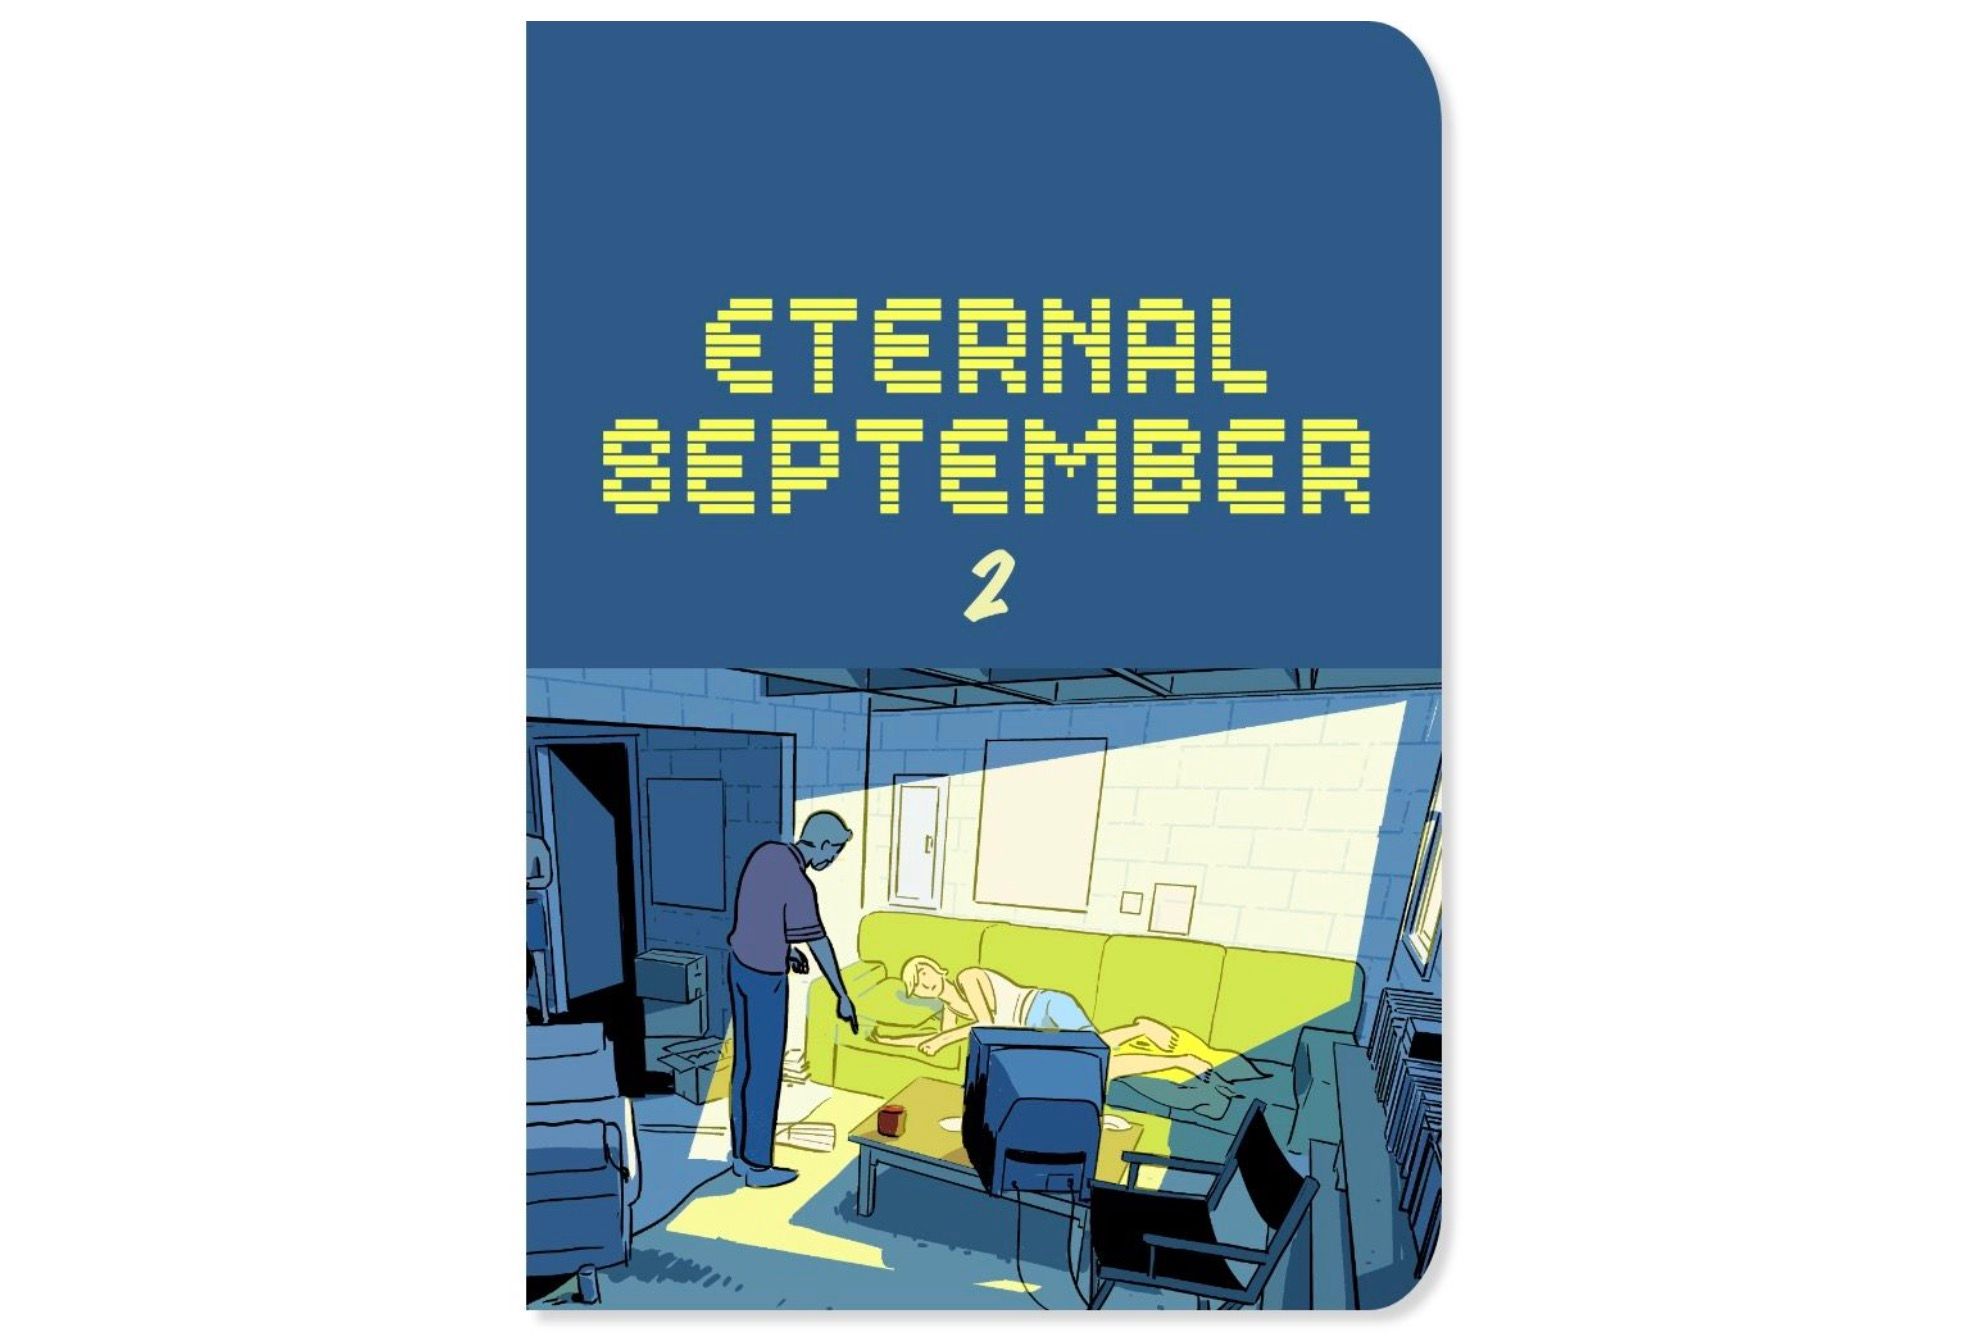  Cover titled "Eternal September 2." Features a man standing in a cluttered basement room, looking at a teenage boy on a green sofa. Somber and introspective.